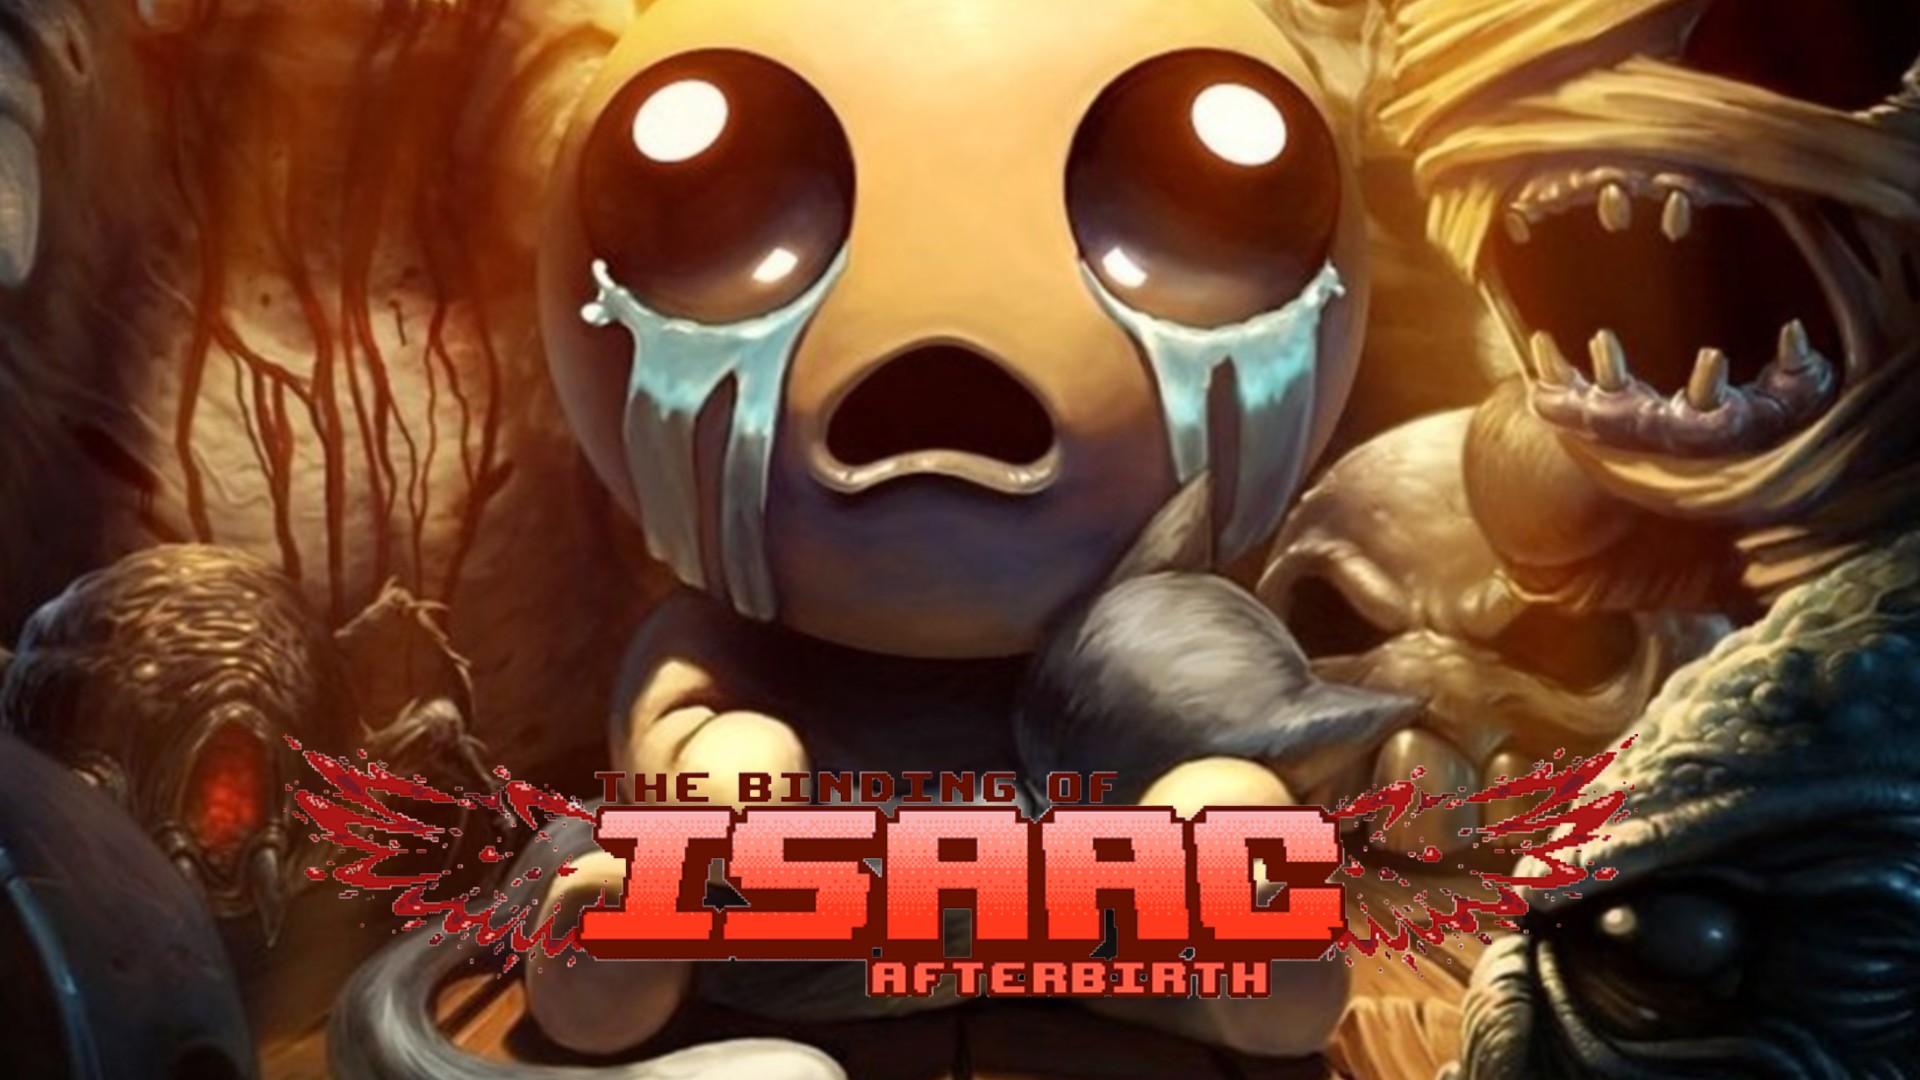 download the last version for ipod The Binding of Isaac: Repentance